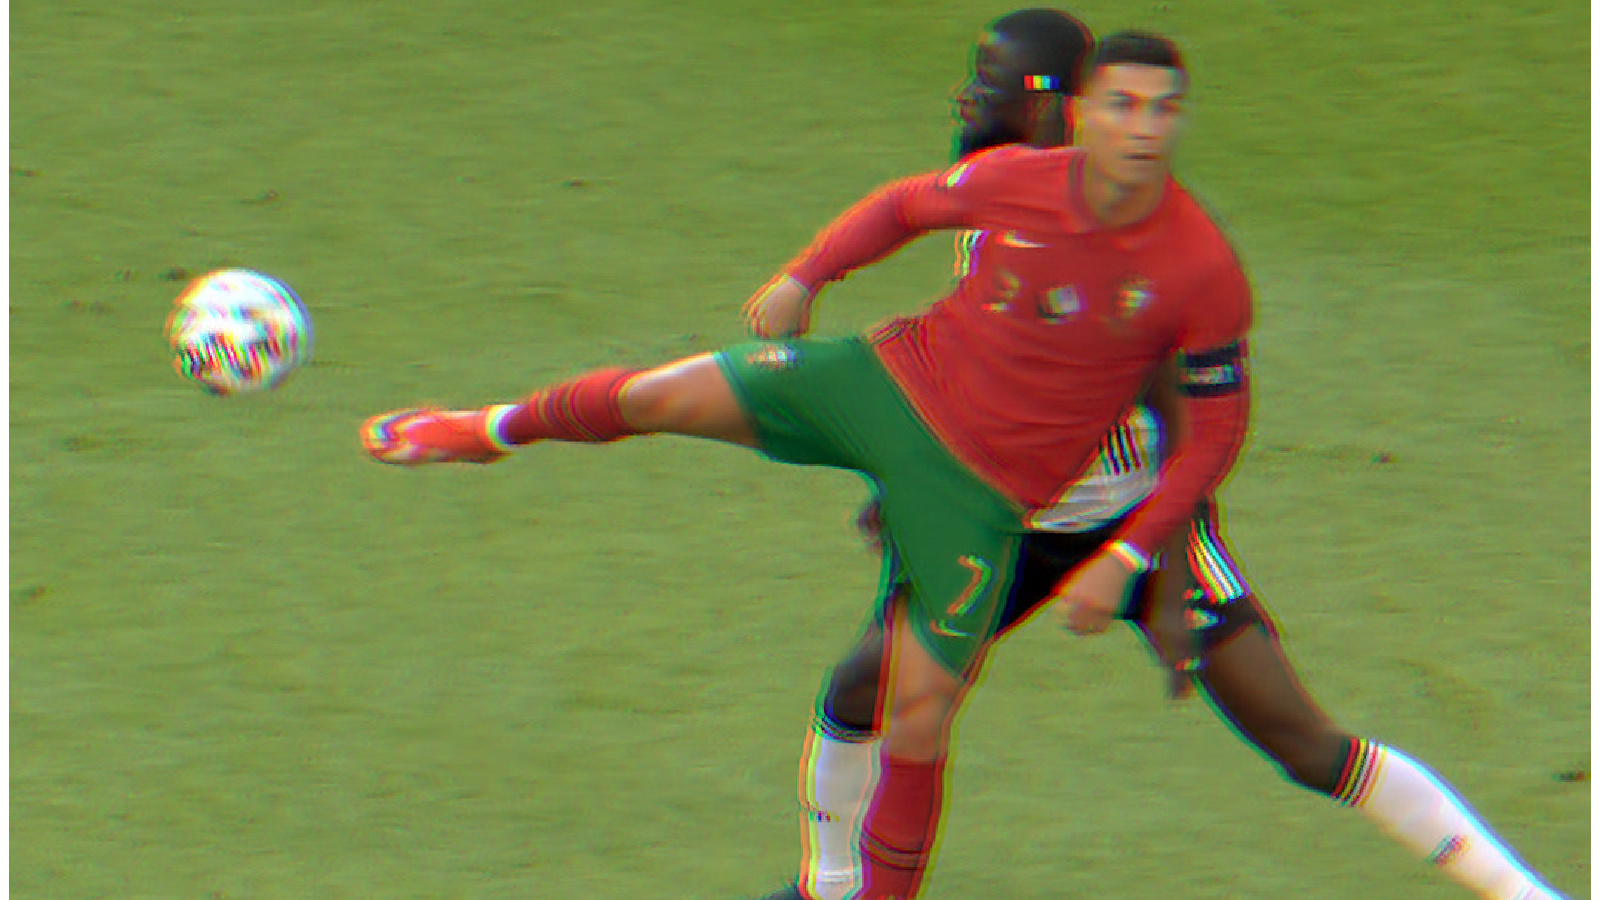 Cristiano Ronaldo executes a back heel no-look pass to deceive Antonio Rudiger in the game against Germany